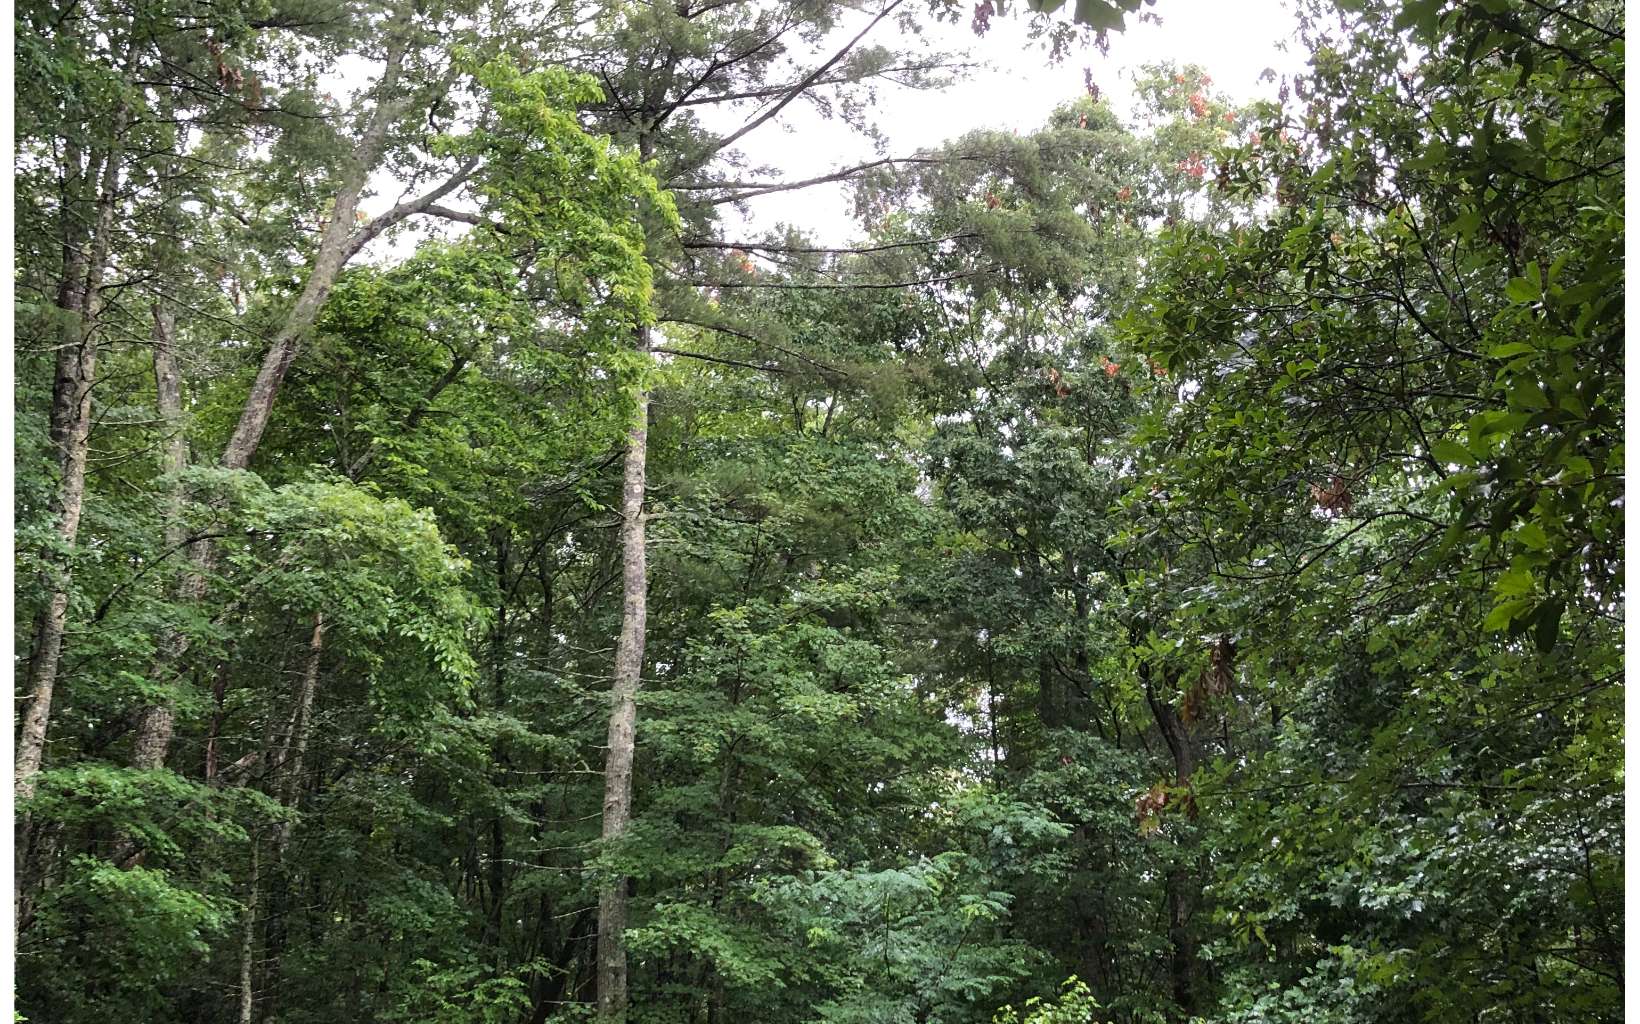 UNRESTRICTED LOT~ Very Private & Secluded Lot with Driveway Already cut in! Treehouse feel on this lot surrounded by Wilderness~ Potential for Beautiful Close Up Mountain Views after Trees are cut. Walking distance to National Forest.